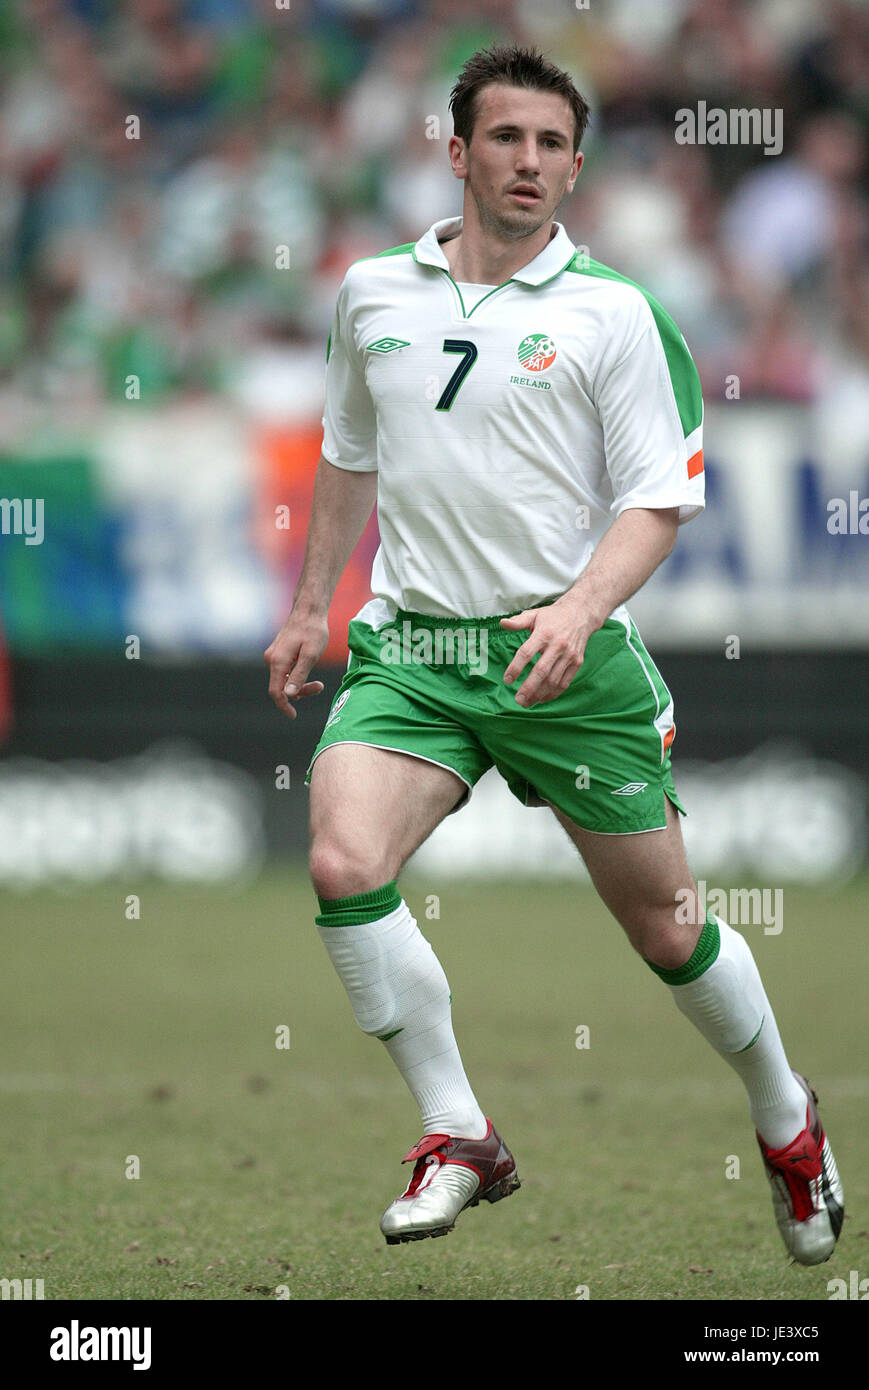 LIAM MILLER REP OF IRELAND & MANCHESTER UT THE VALLEY CHARLTON ENGLAND 29 May 2004 Stock Photo